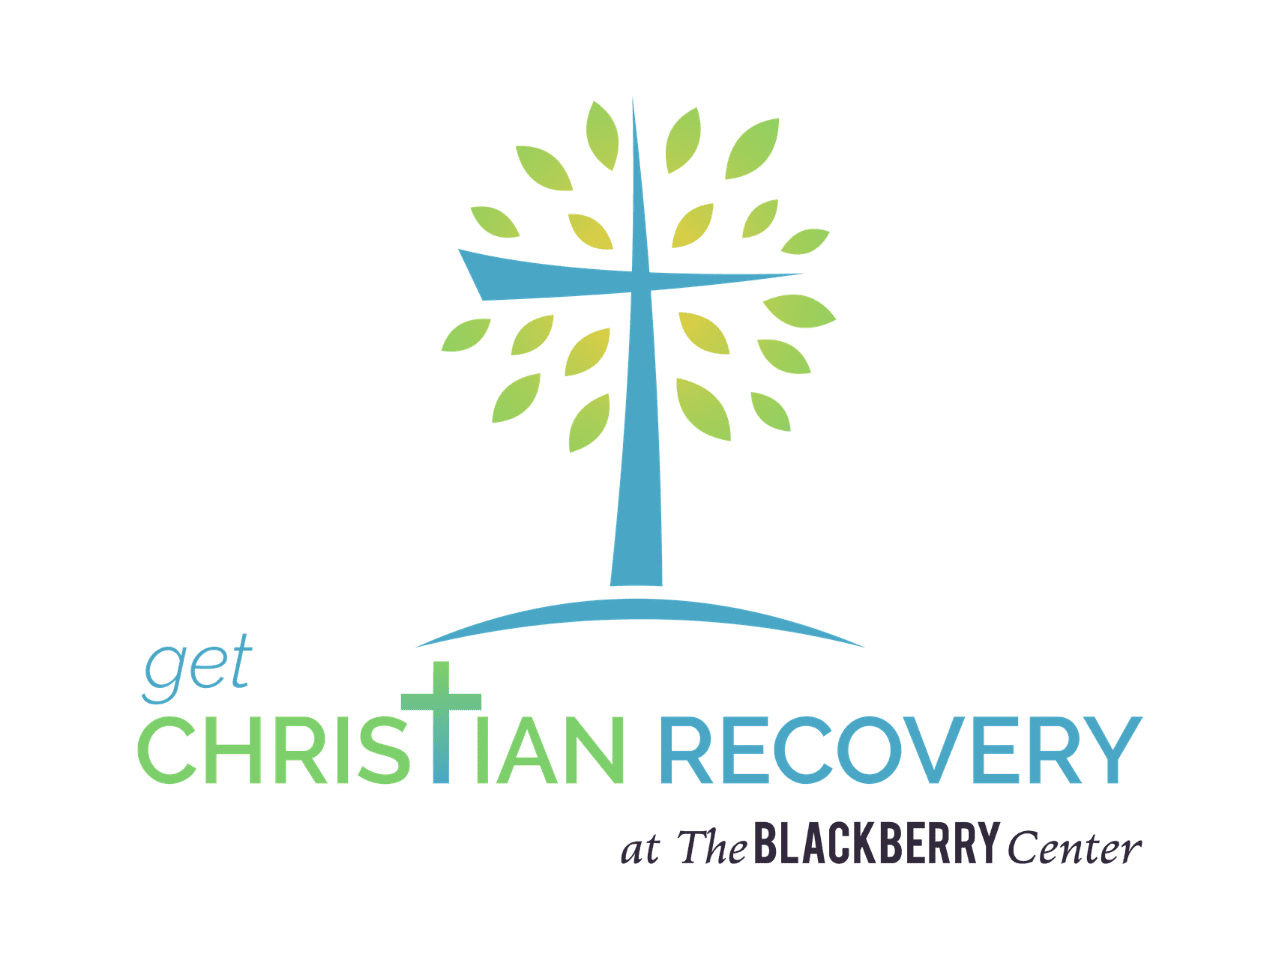 get-christian-recovery-logo-at-the-blackberry-center